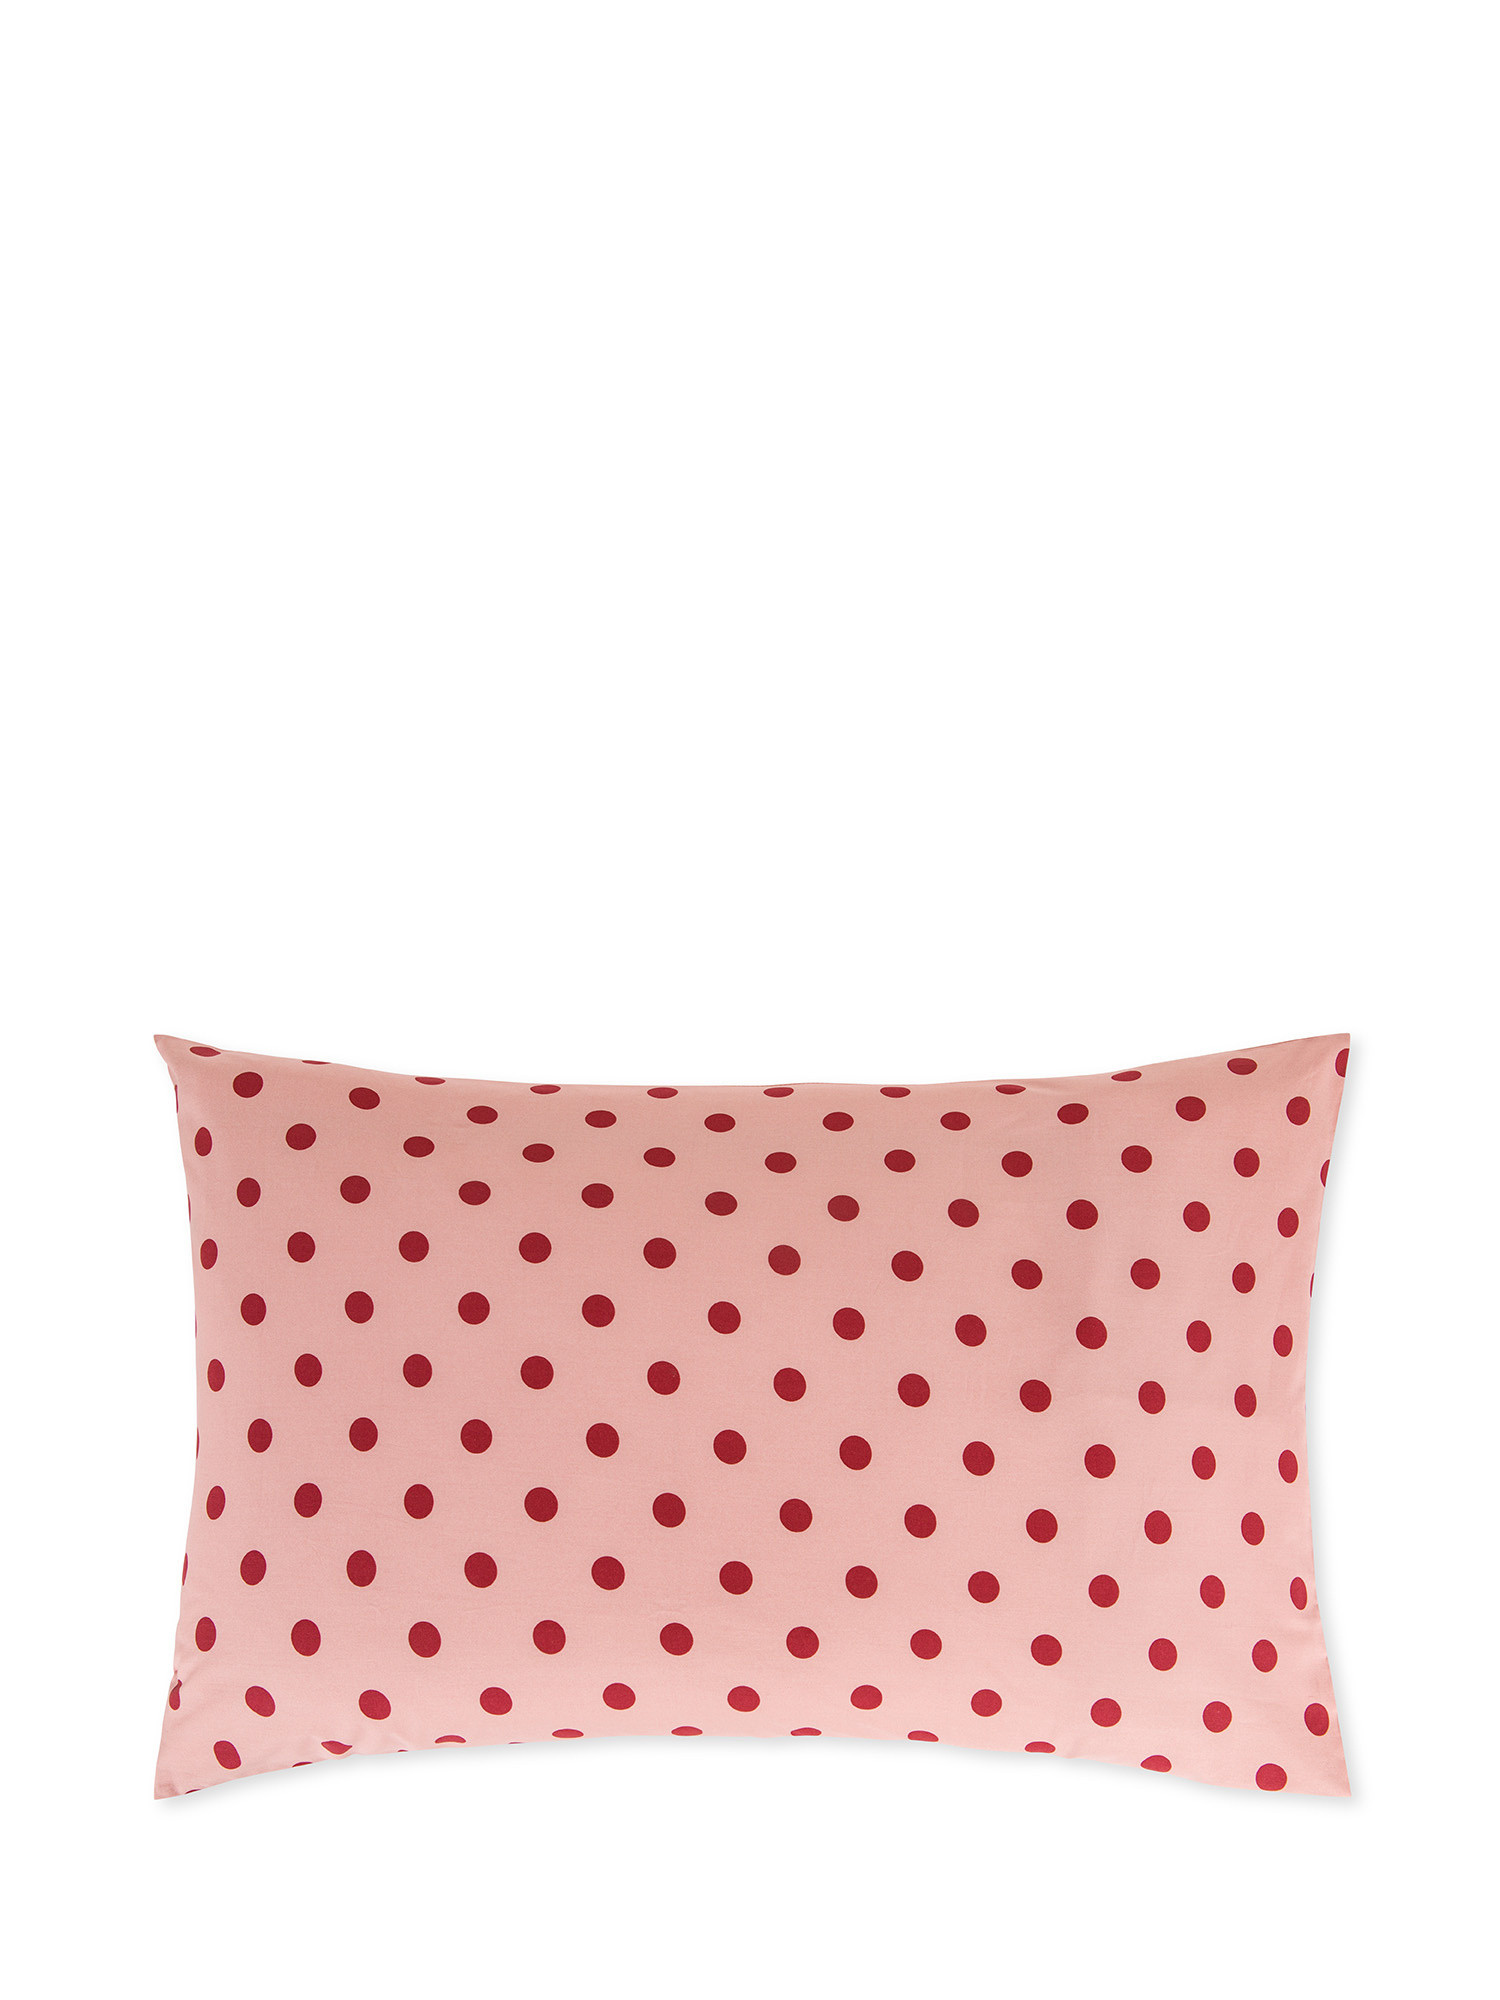 Polka dot print percale cotton pillowcase, Multicolor, large image number 0